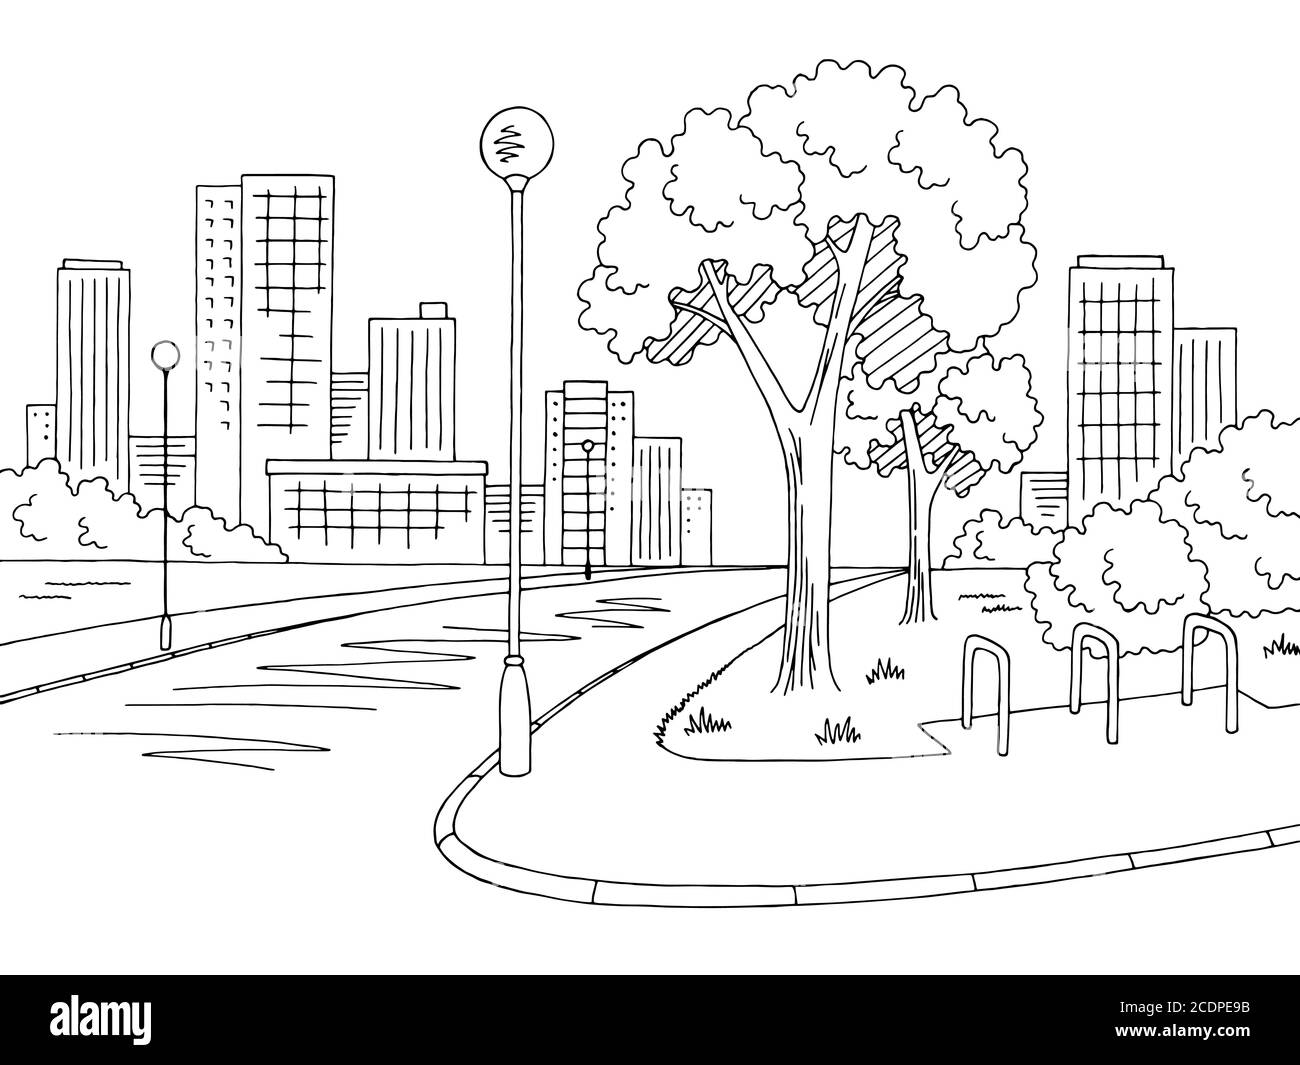 City Street Drawing Stock Illustrations  56094 City Street Drawing Stock  Illustrations Vectors  Clipart  Dreamstime